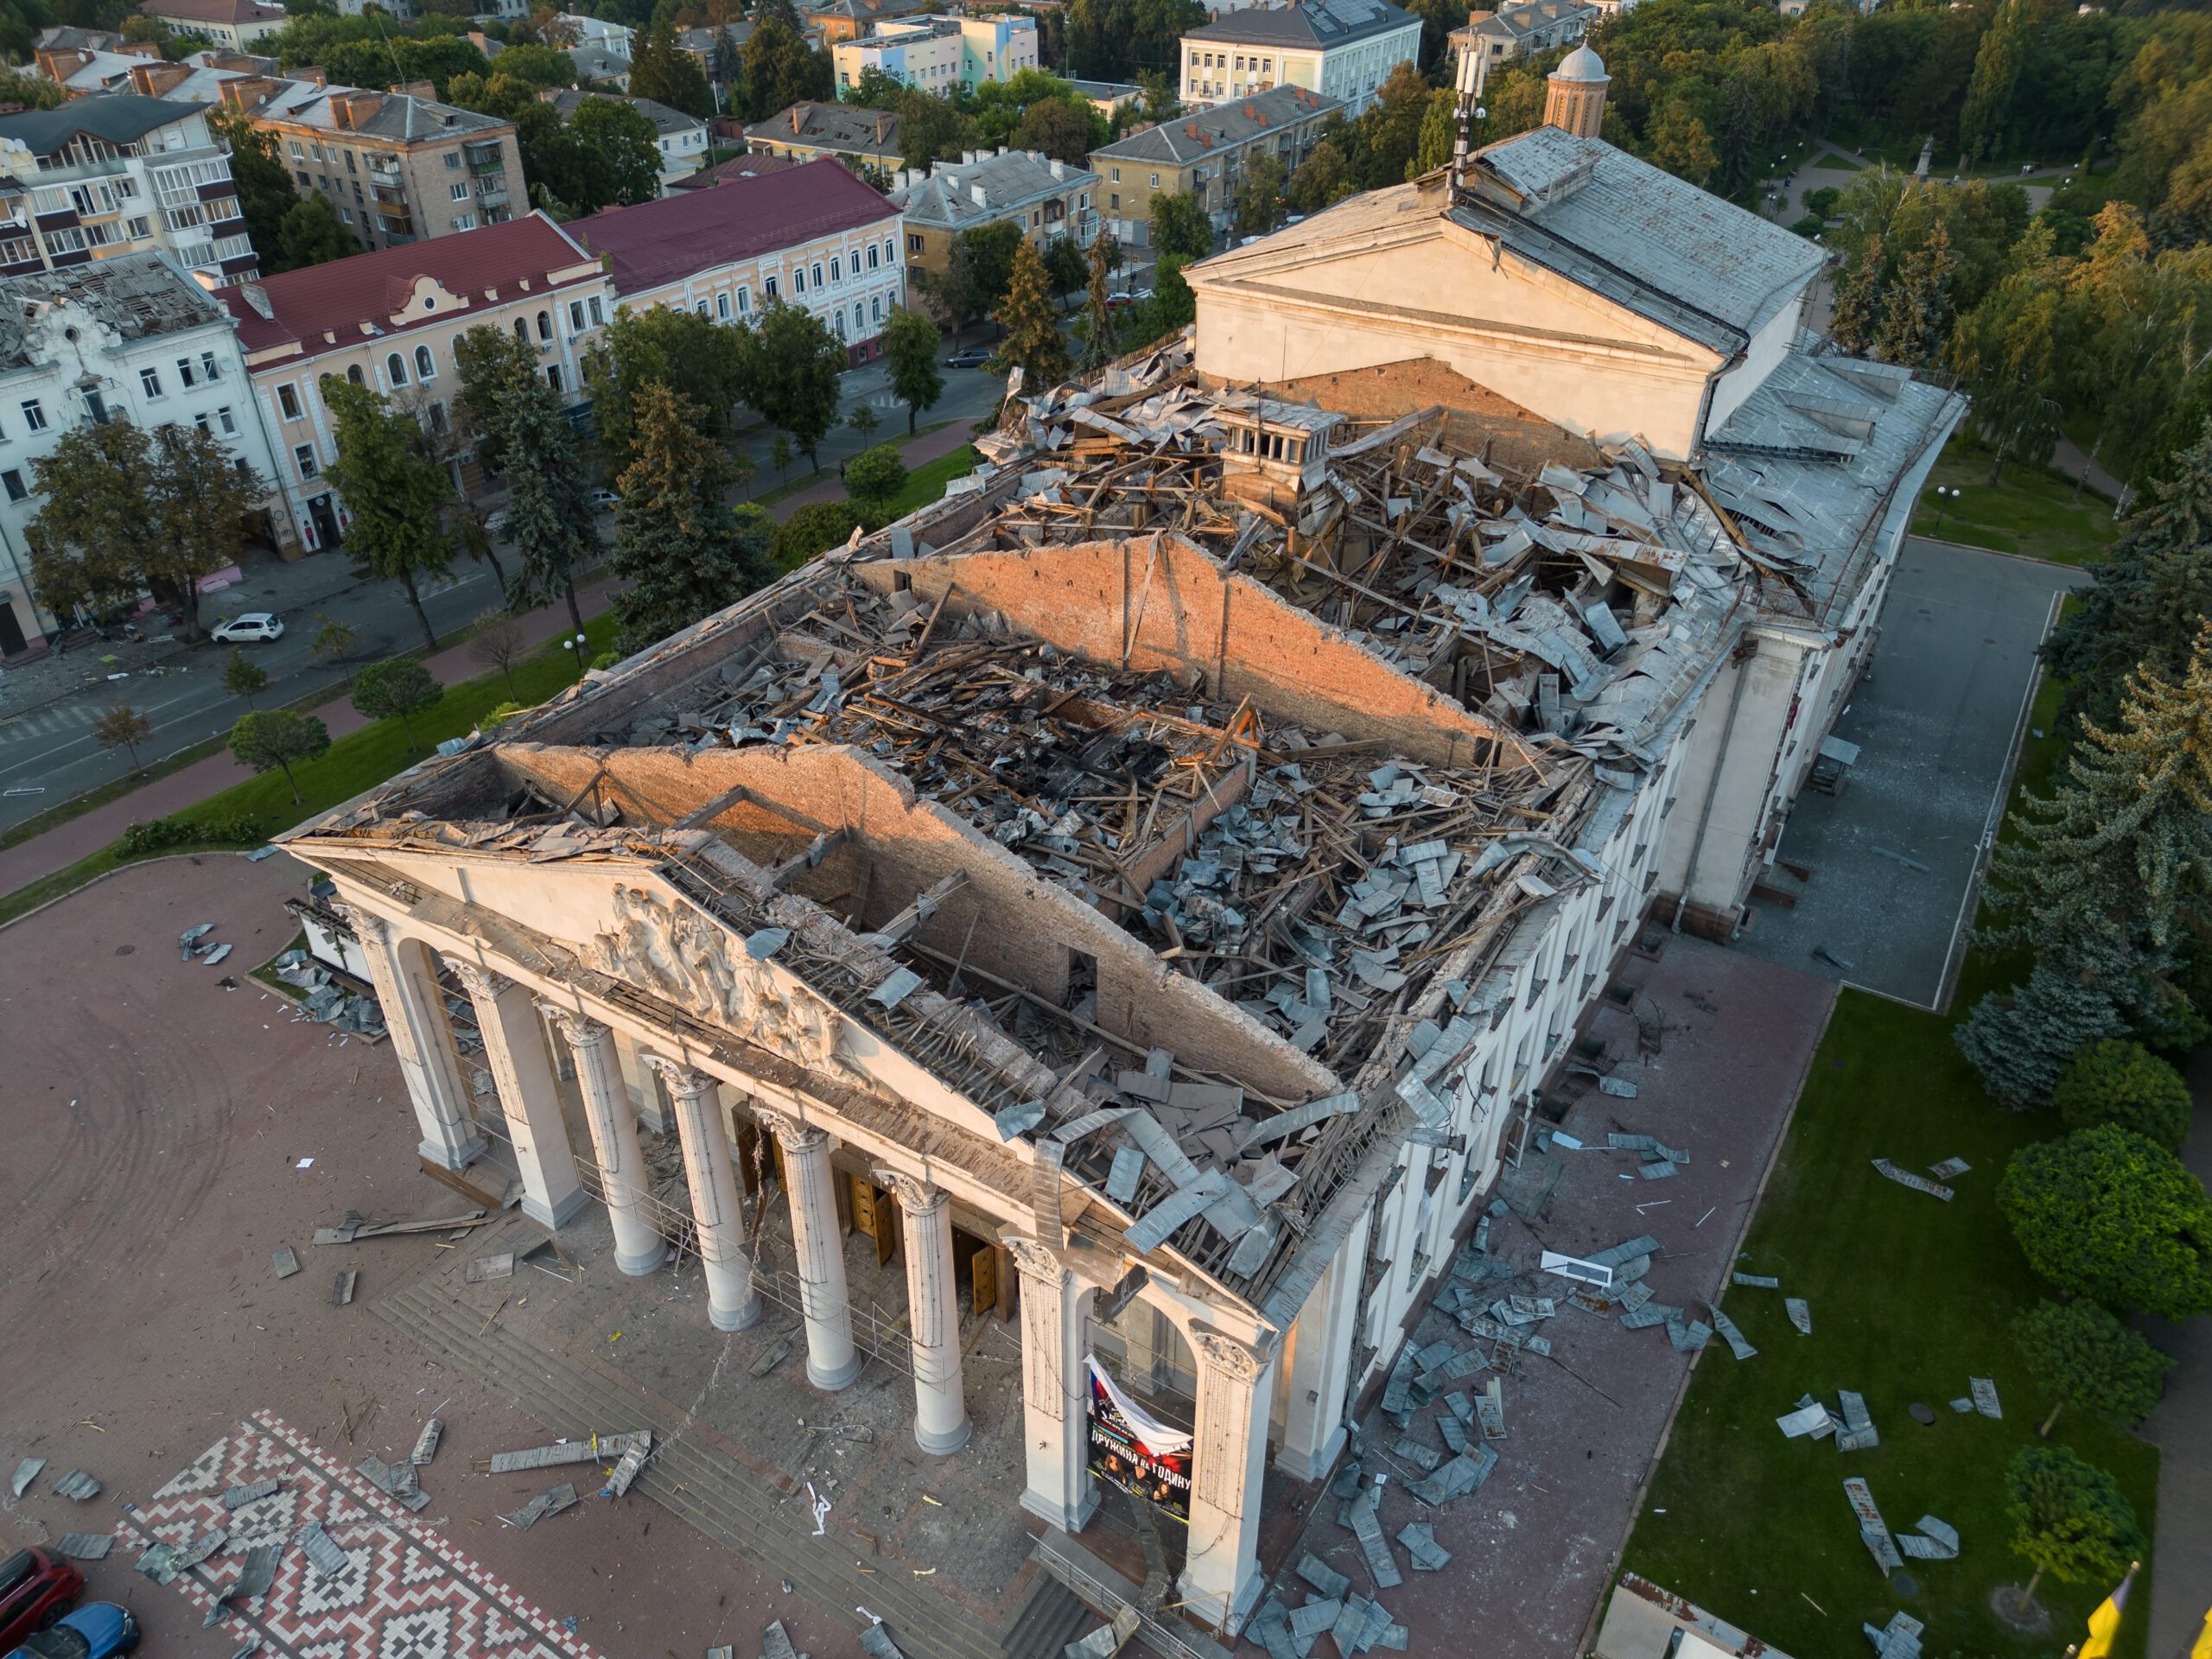 Damage is seen from a late morning missile attack hitting the Chernihiv Regional Academic Ukrainian Music and Drama Theater that killed 7 people, injuring 129, on August 19, 2023 in Chernihiv, Ukraine. | R2P Worker Among Those Killed in Ukraine Missile Attack | HIAS